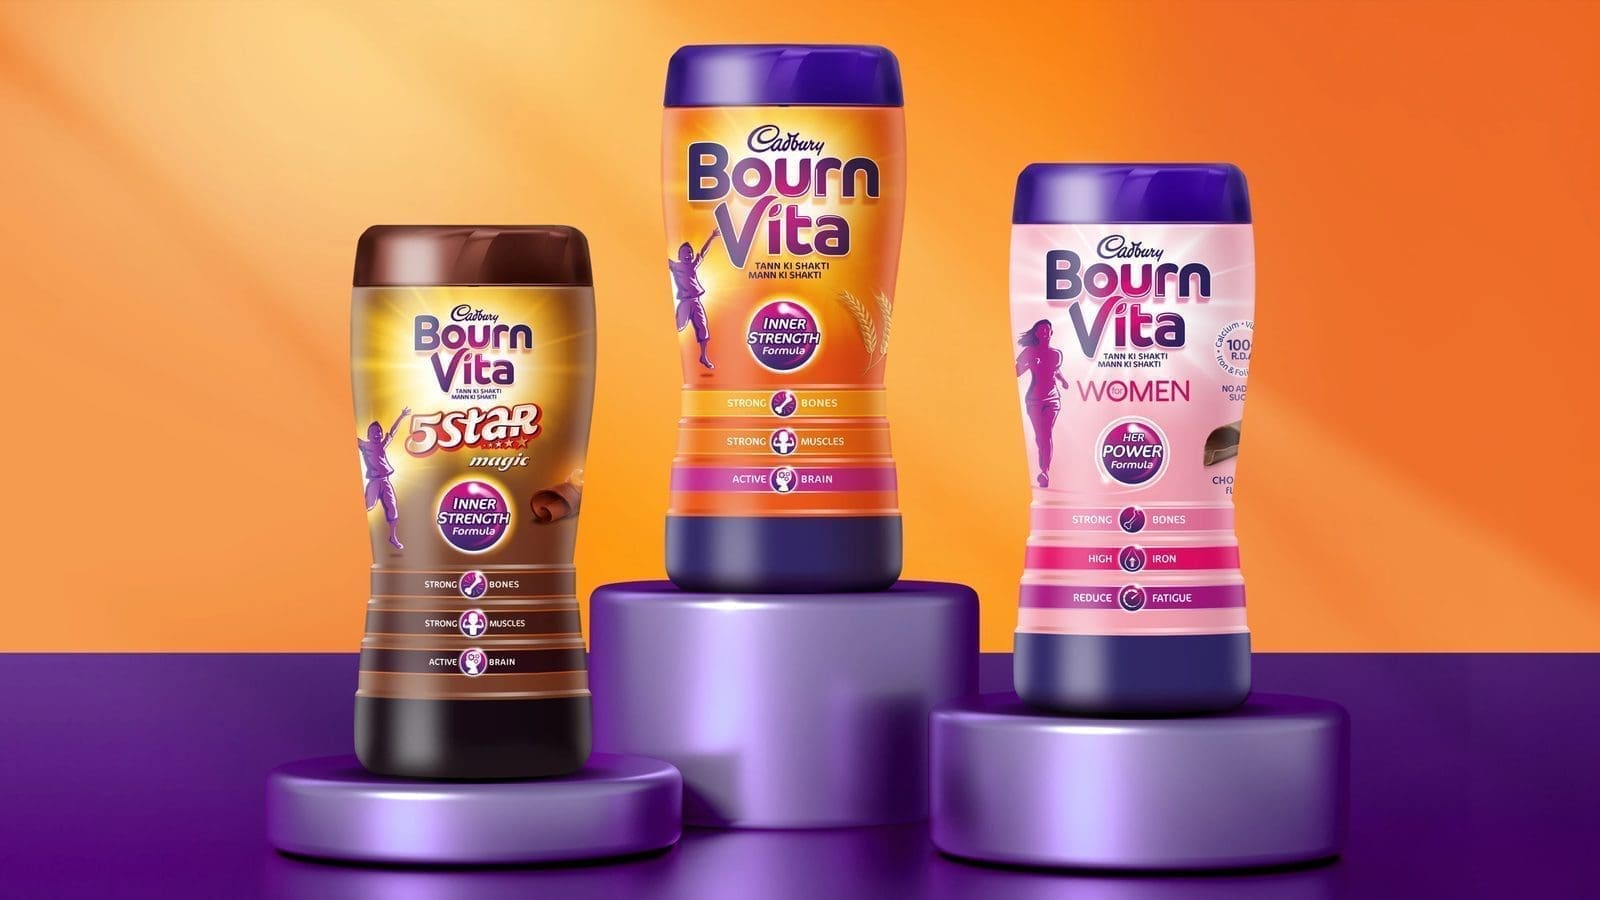 Mondelez asked to redesign, reformulate Bournvita in India over misleading information and high sugar content